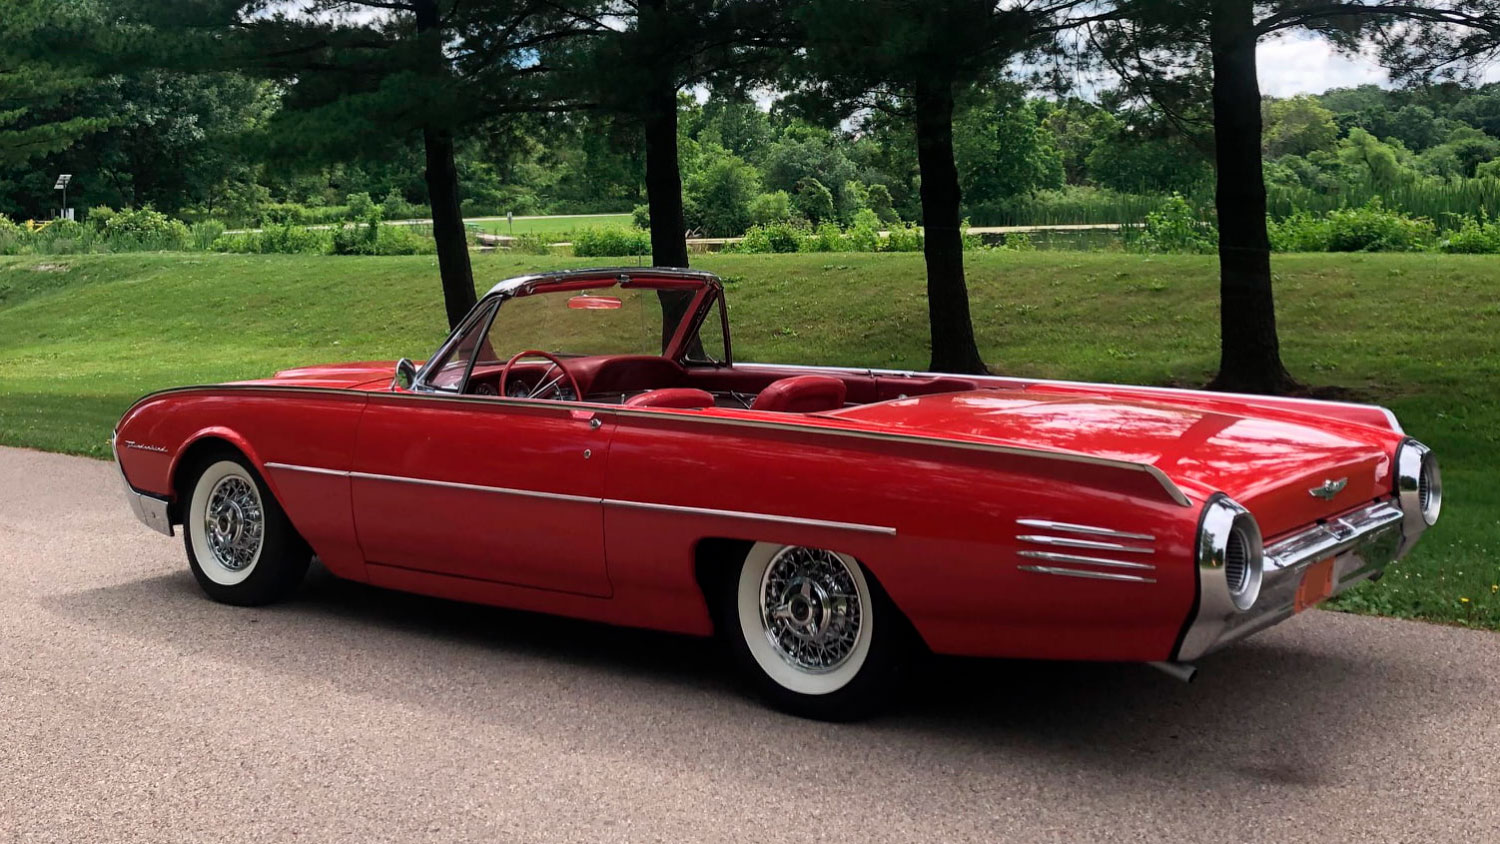 Monte Carlo Red 1961 Ford Thunderbird Convertible Indy Auction Bound